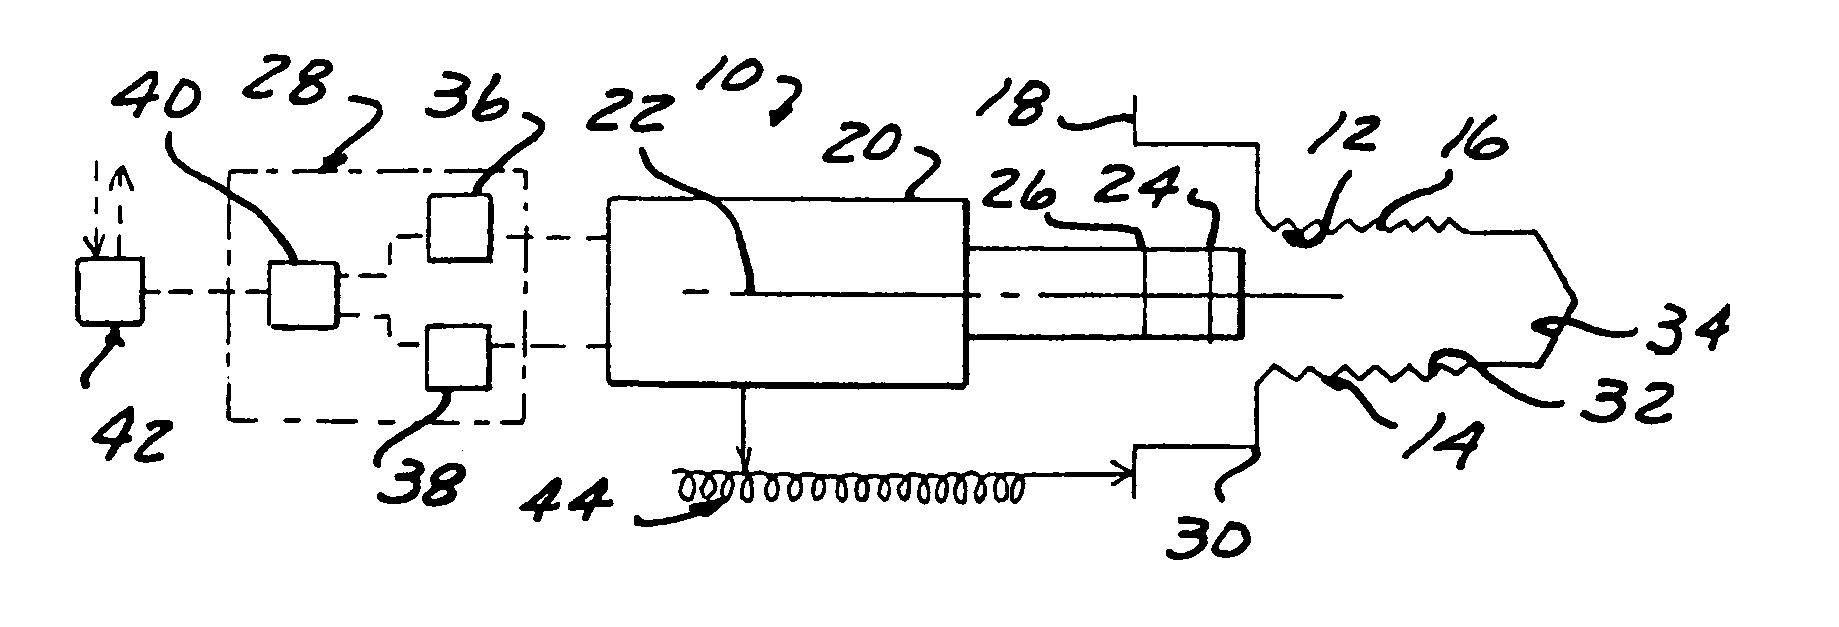 Dual coil probe for detecting geometric differences while stationary with respect to threaded apertures and fasteners or studs